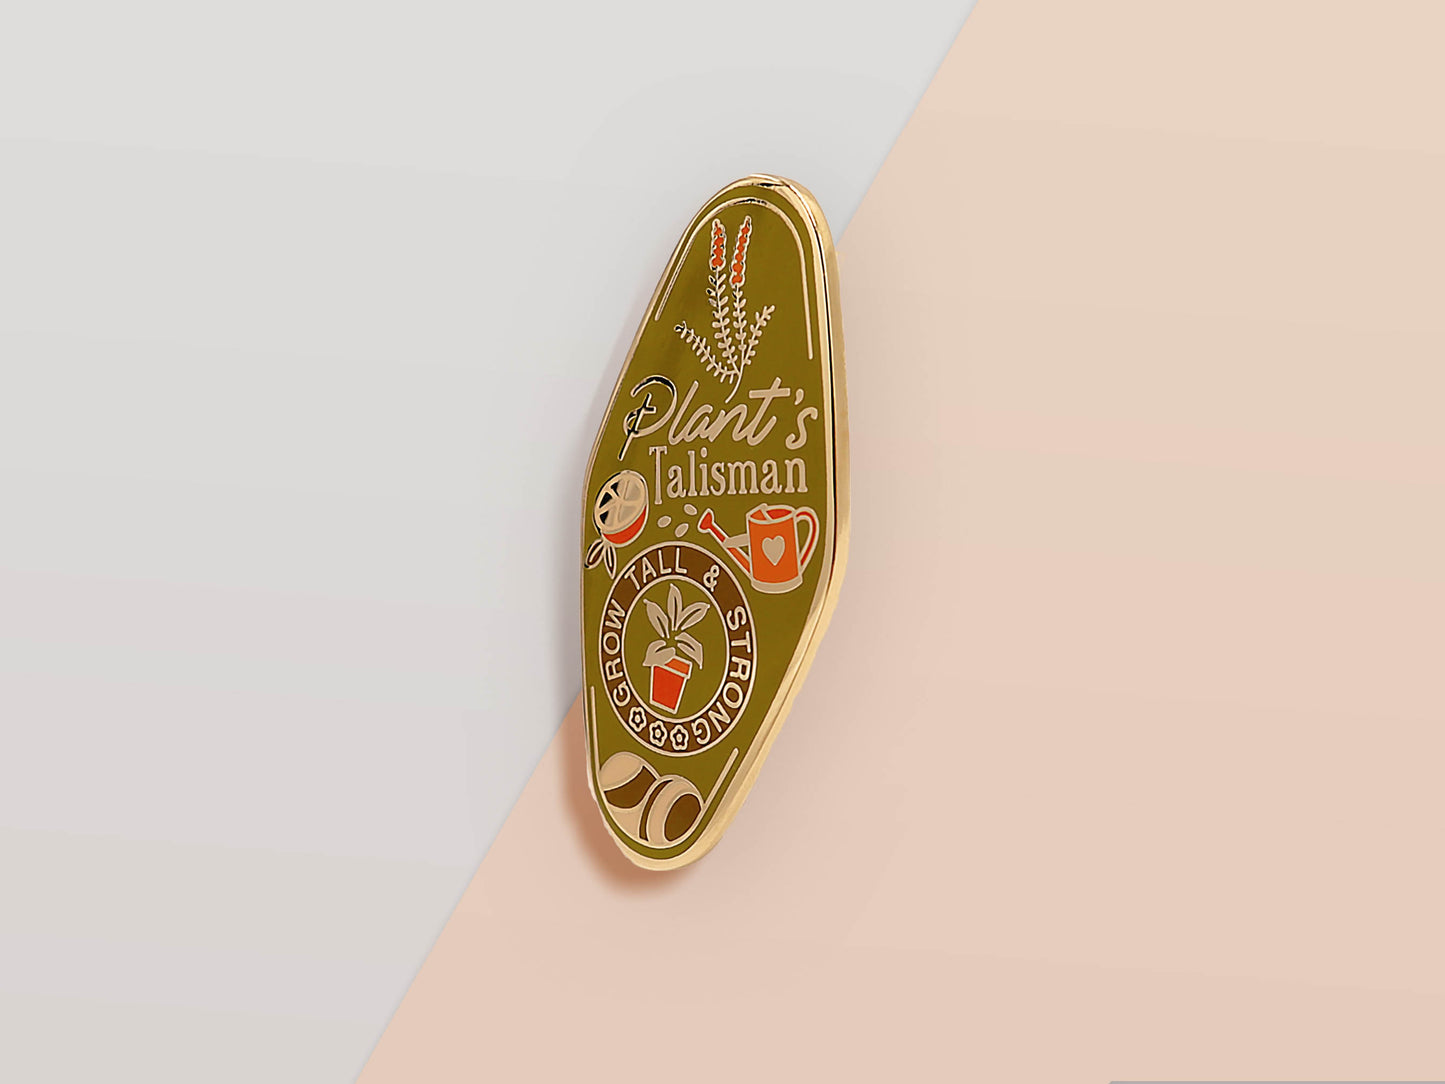 Gold Enamel Talisman Pin with green design and the words plant's Talisman, grow tall and strong. The pins design includes a potted plant and a watering can, fruit, as well as flowers and crystals.